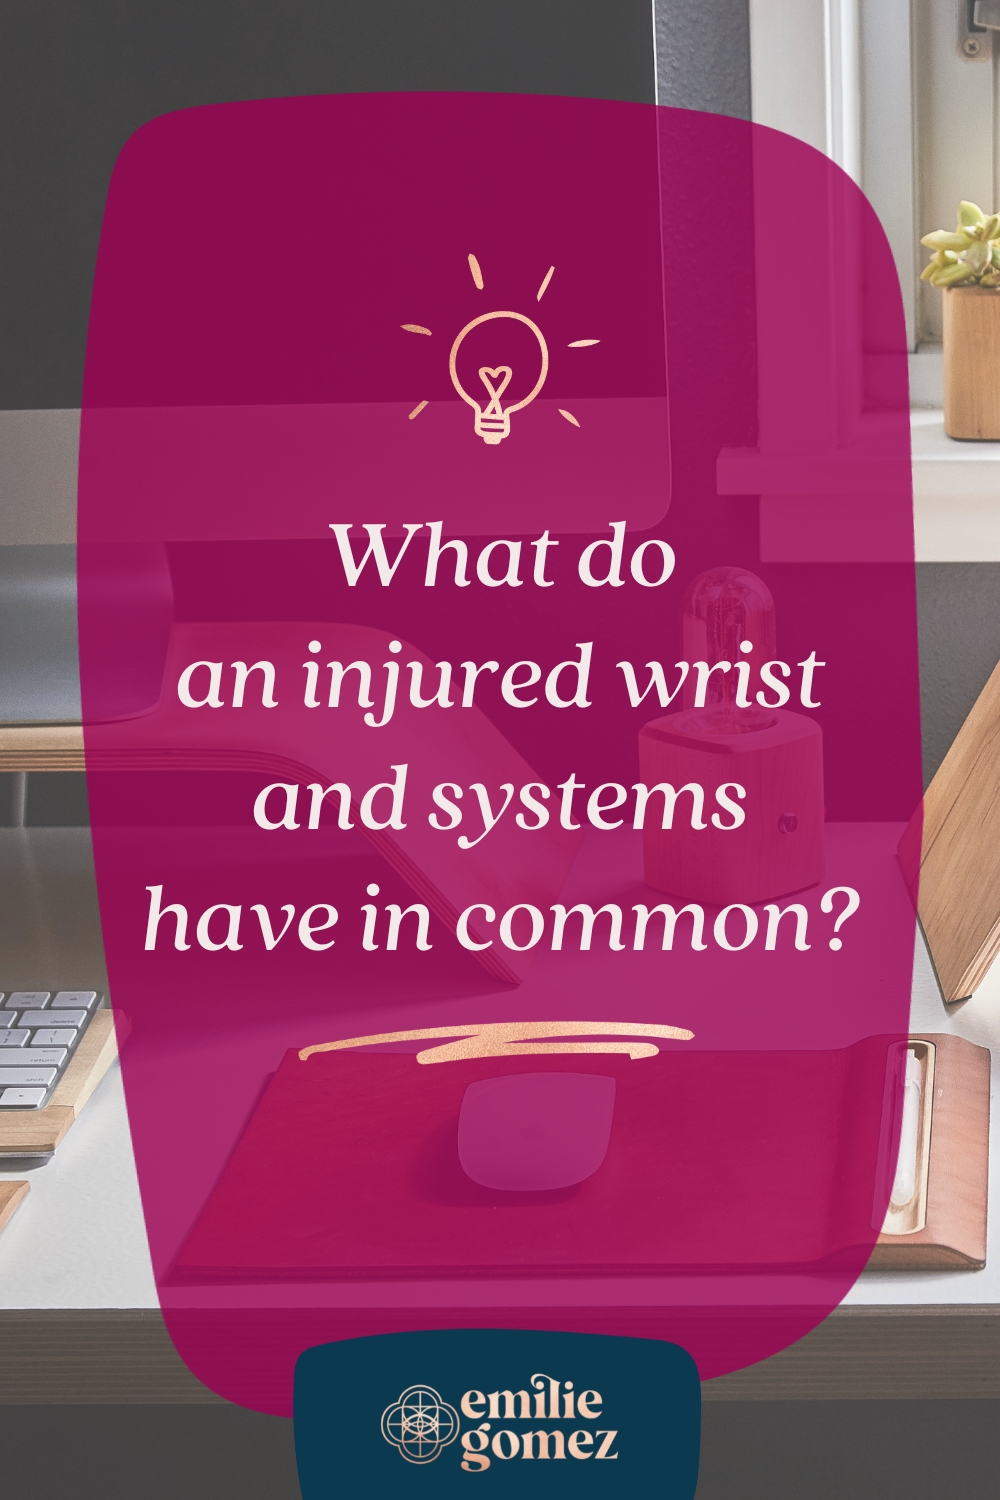 Here's an insight into how I applied the methodology I teach to all my clients about creating systems to my business after I hurt my wrist. #systems #ergonomics